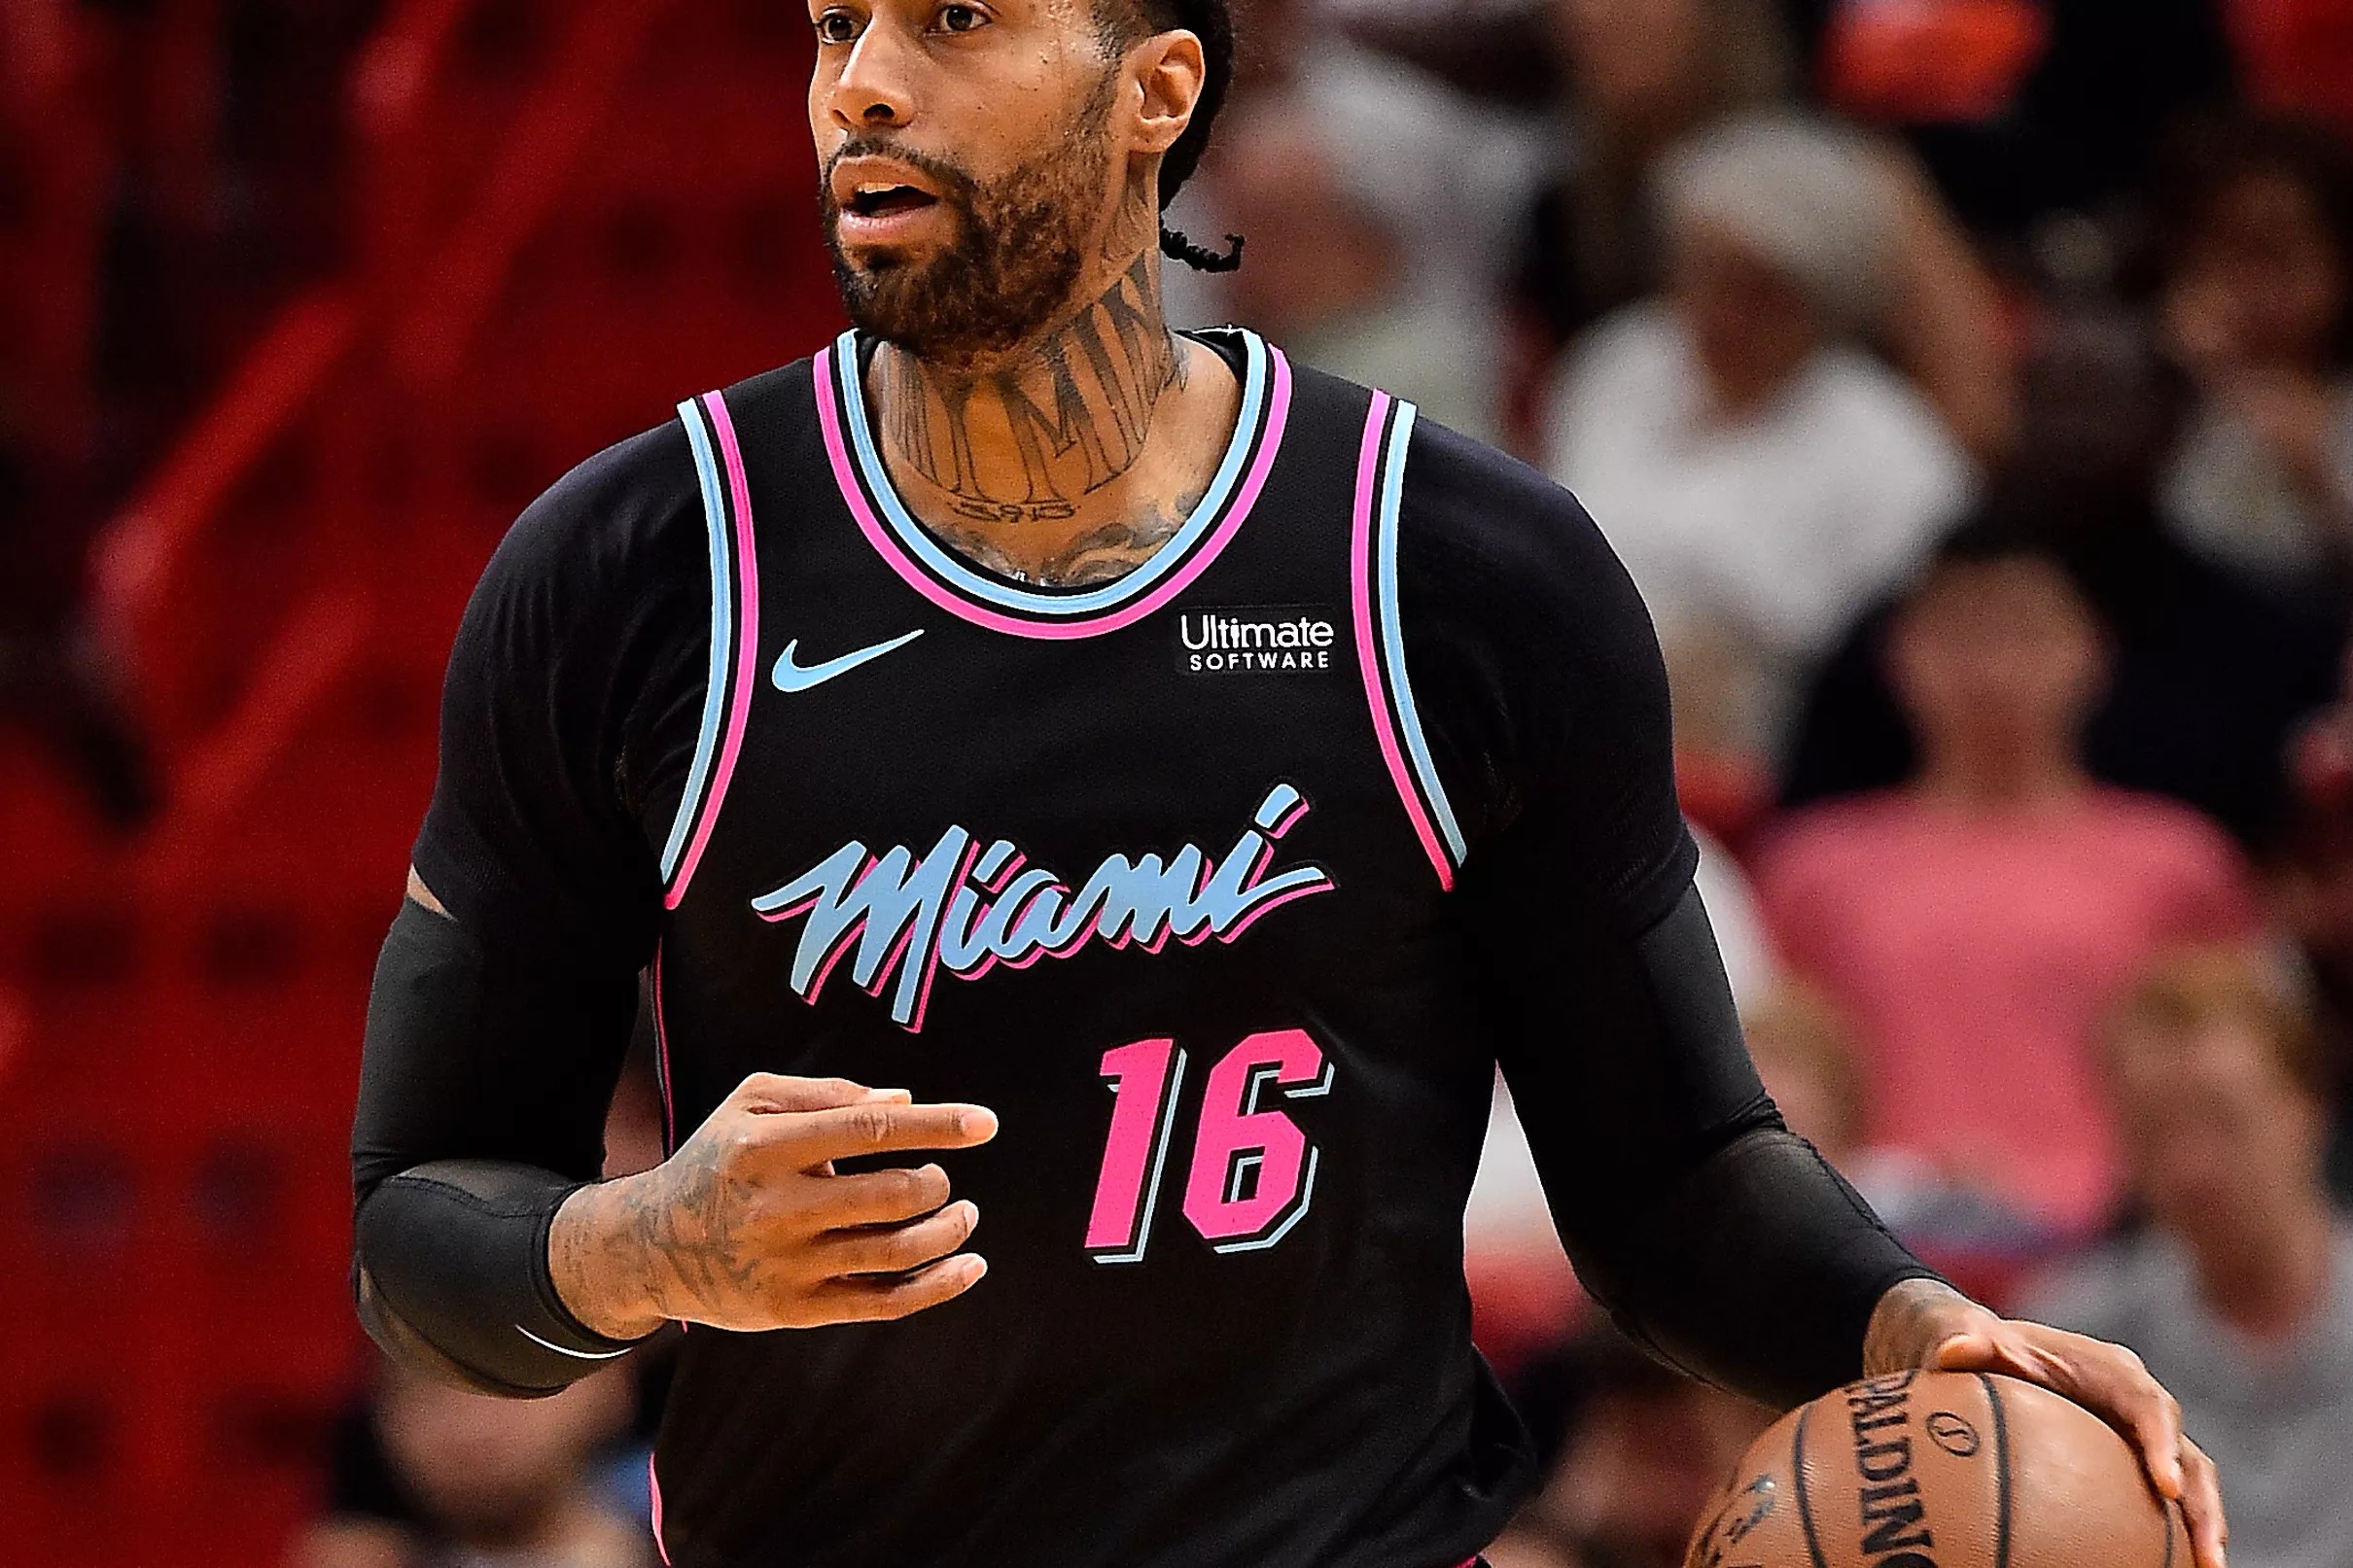 James Johnson leads the Miami Heat in one important metric this season